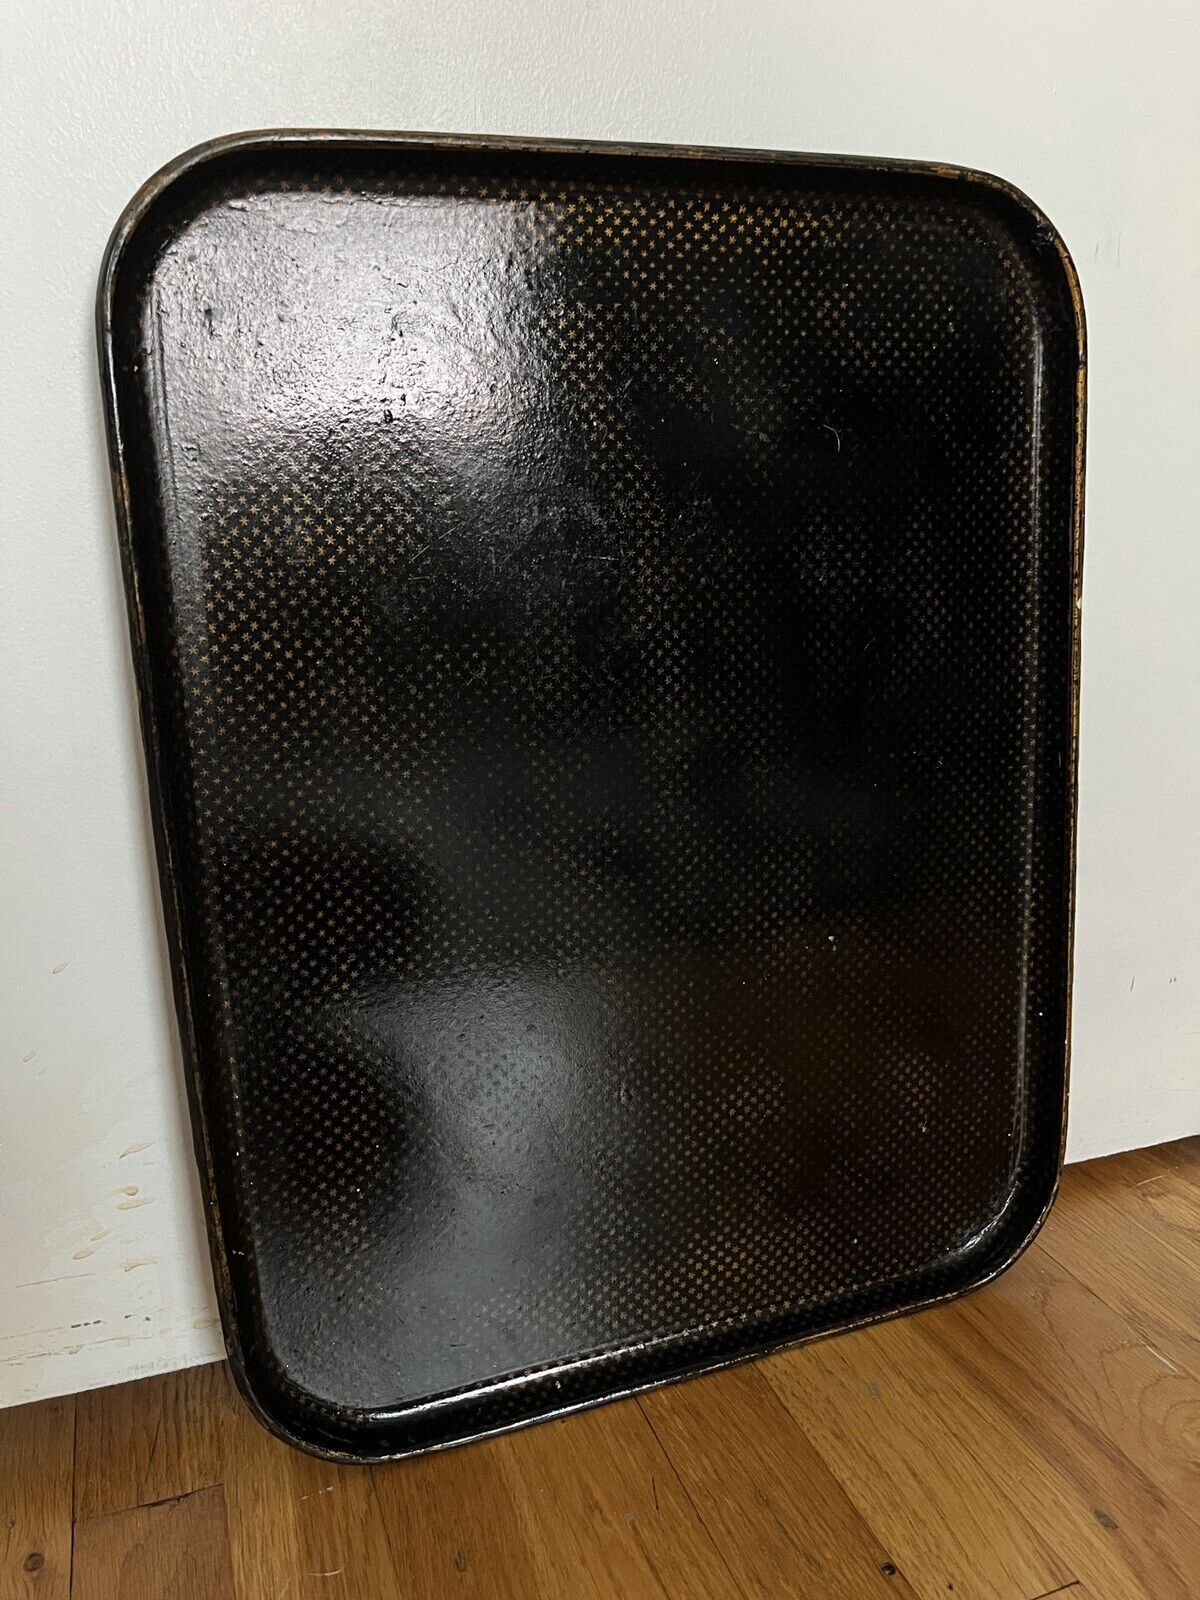 Lrg 1800s French Empire Vintage Black & Gold Star Lacquer Tray 16x20